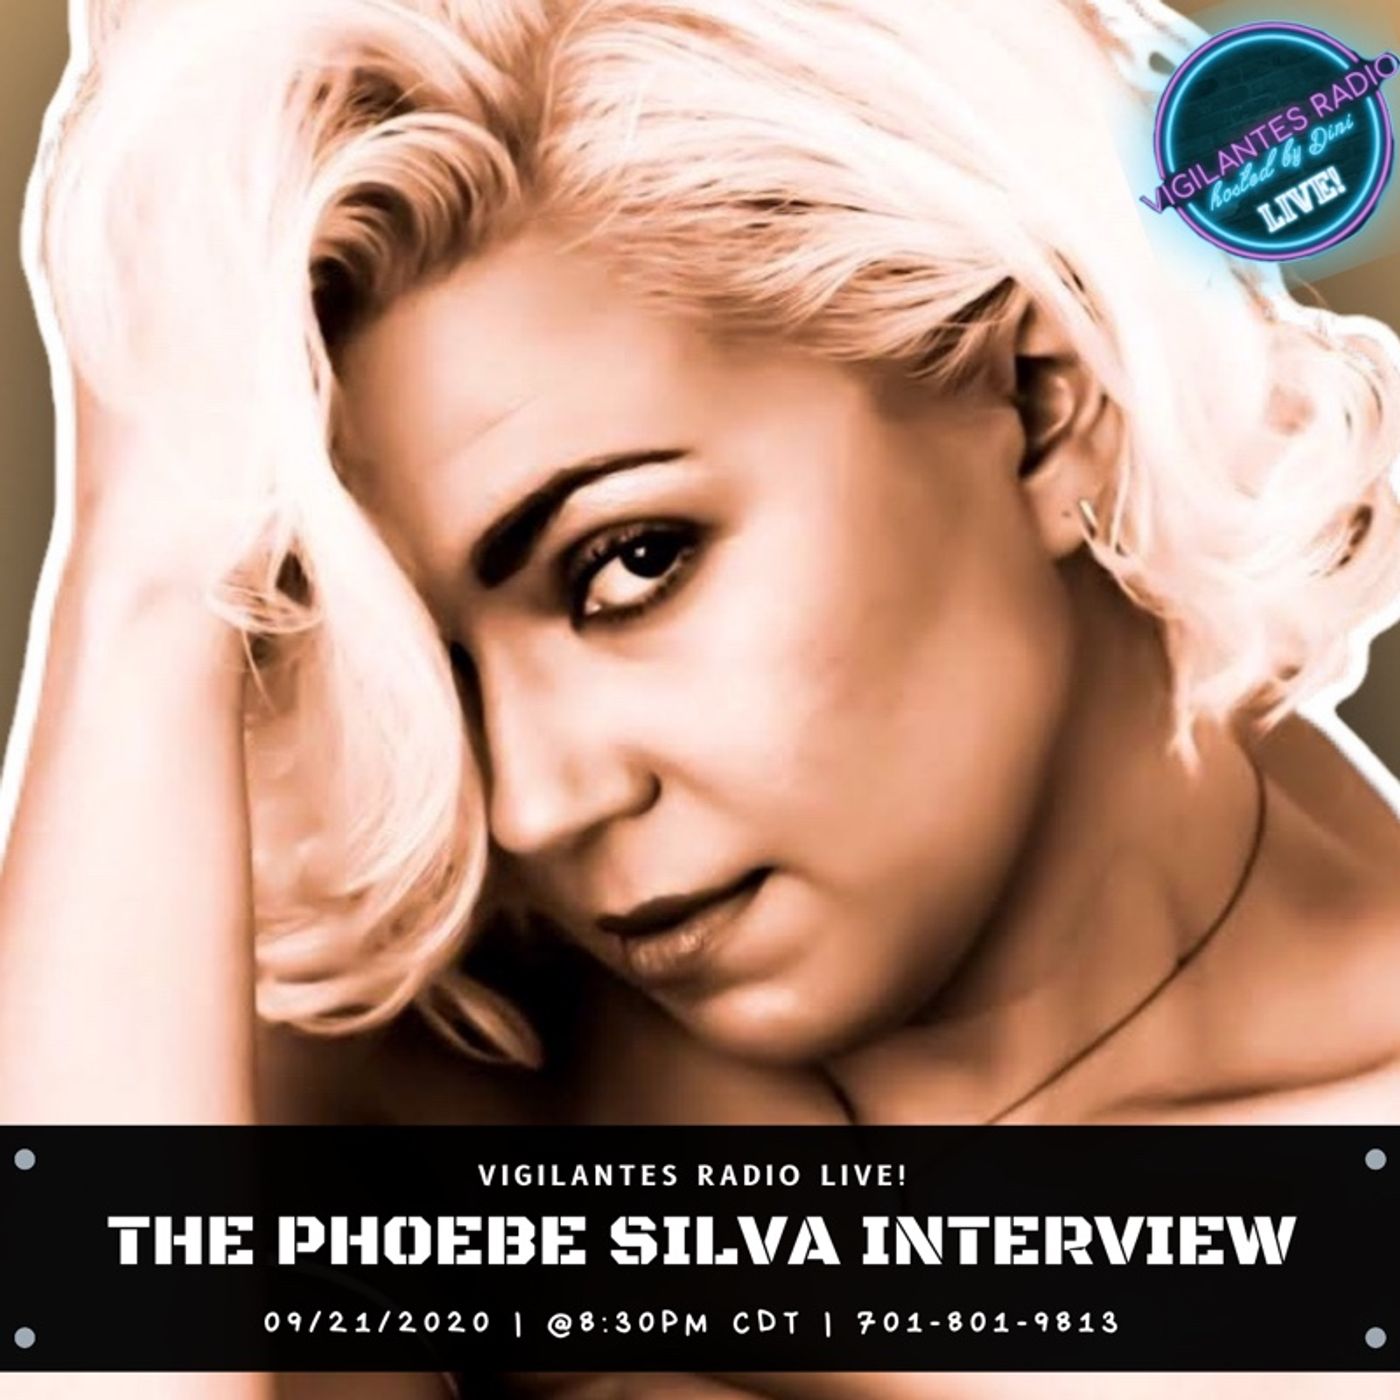 The Phoebe Silva Interview. Image